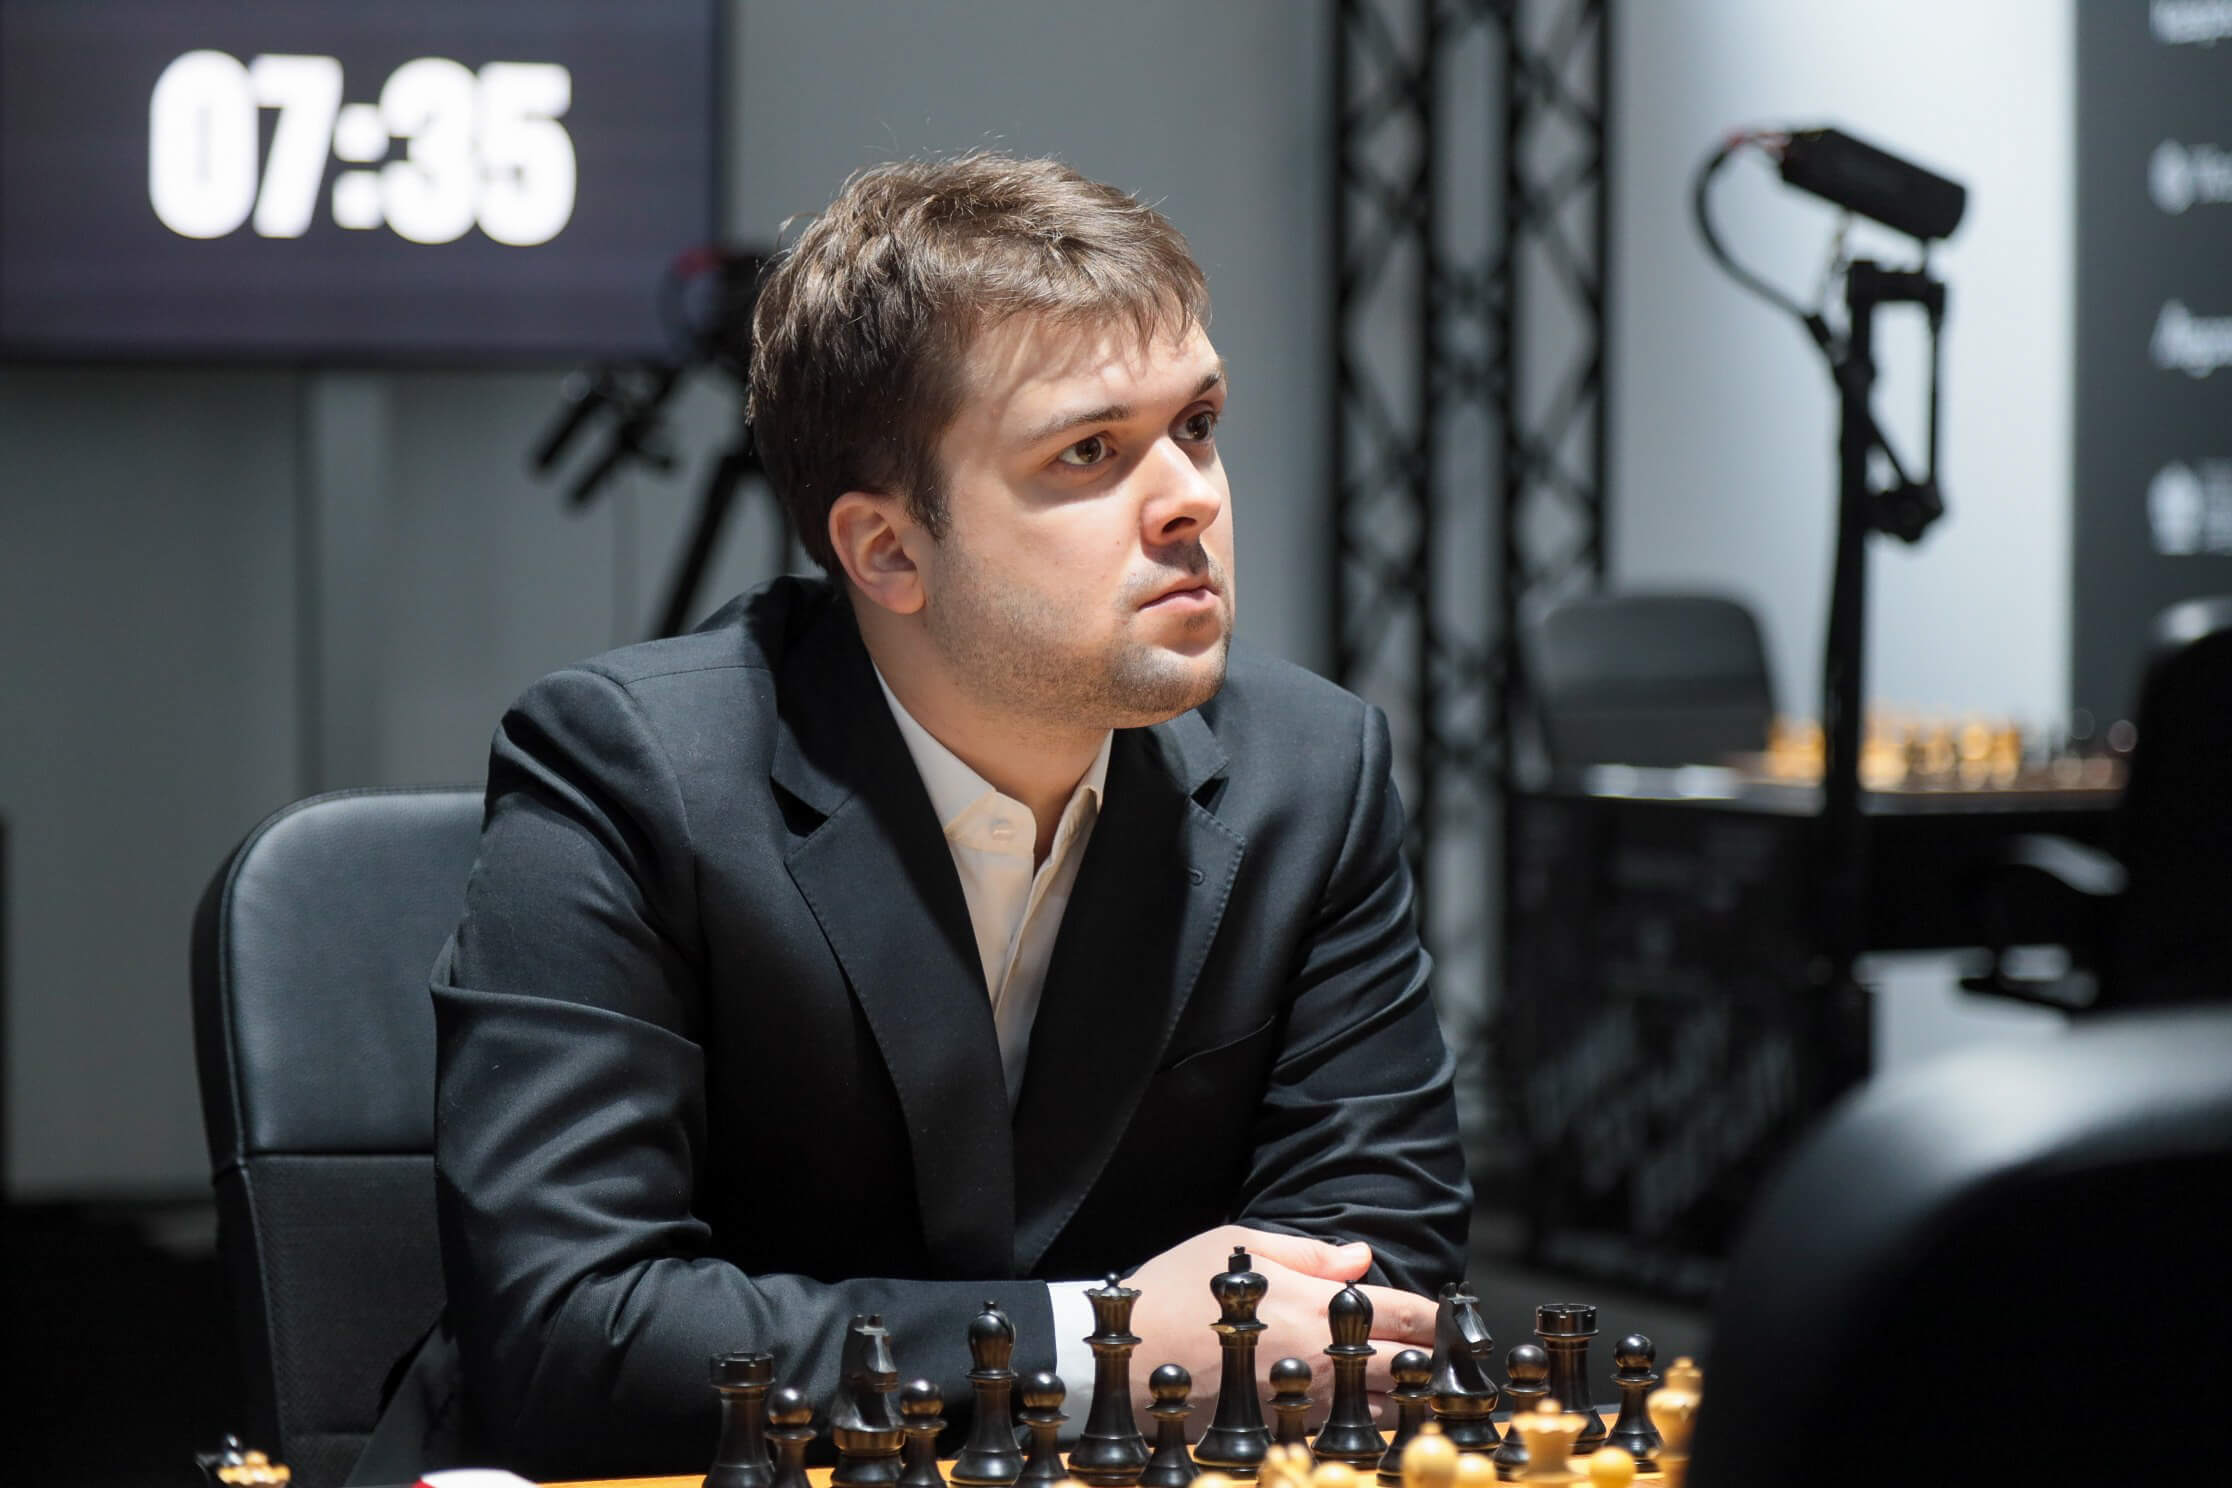 Nakamura Beats Esipenko Who Blunders a Game in Round 2 of the FIDE